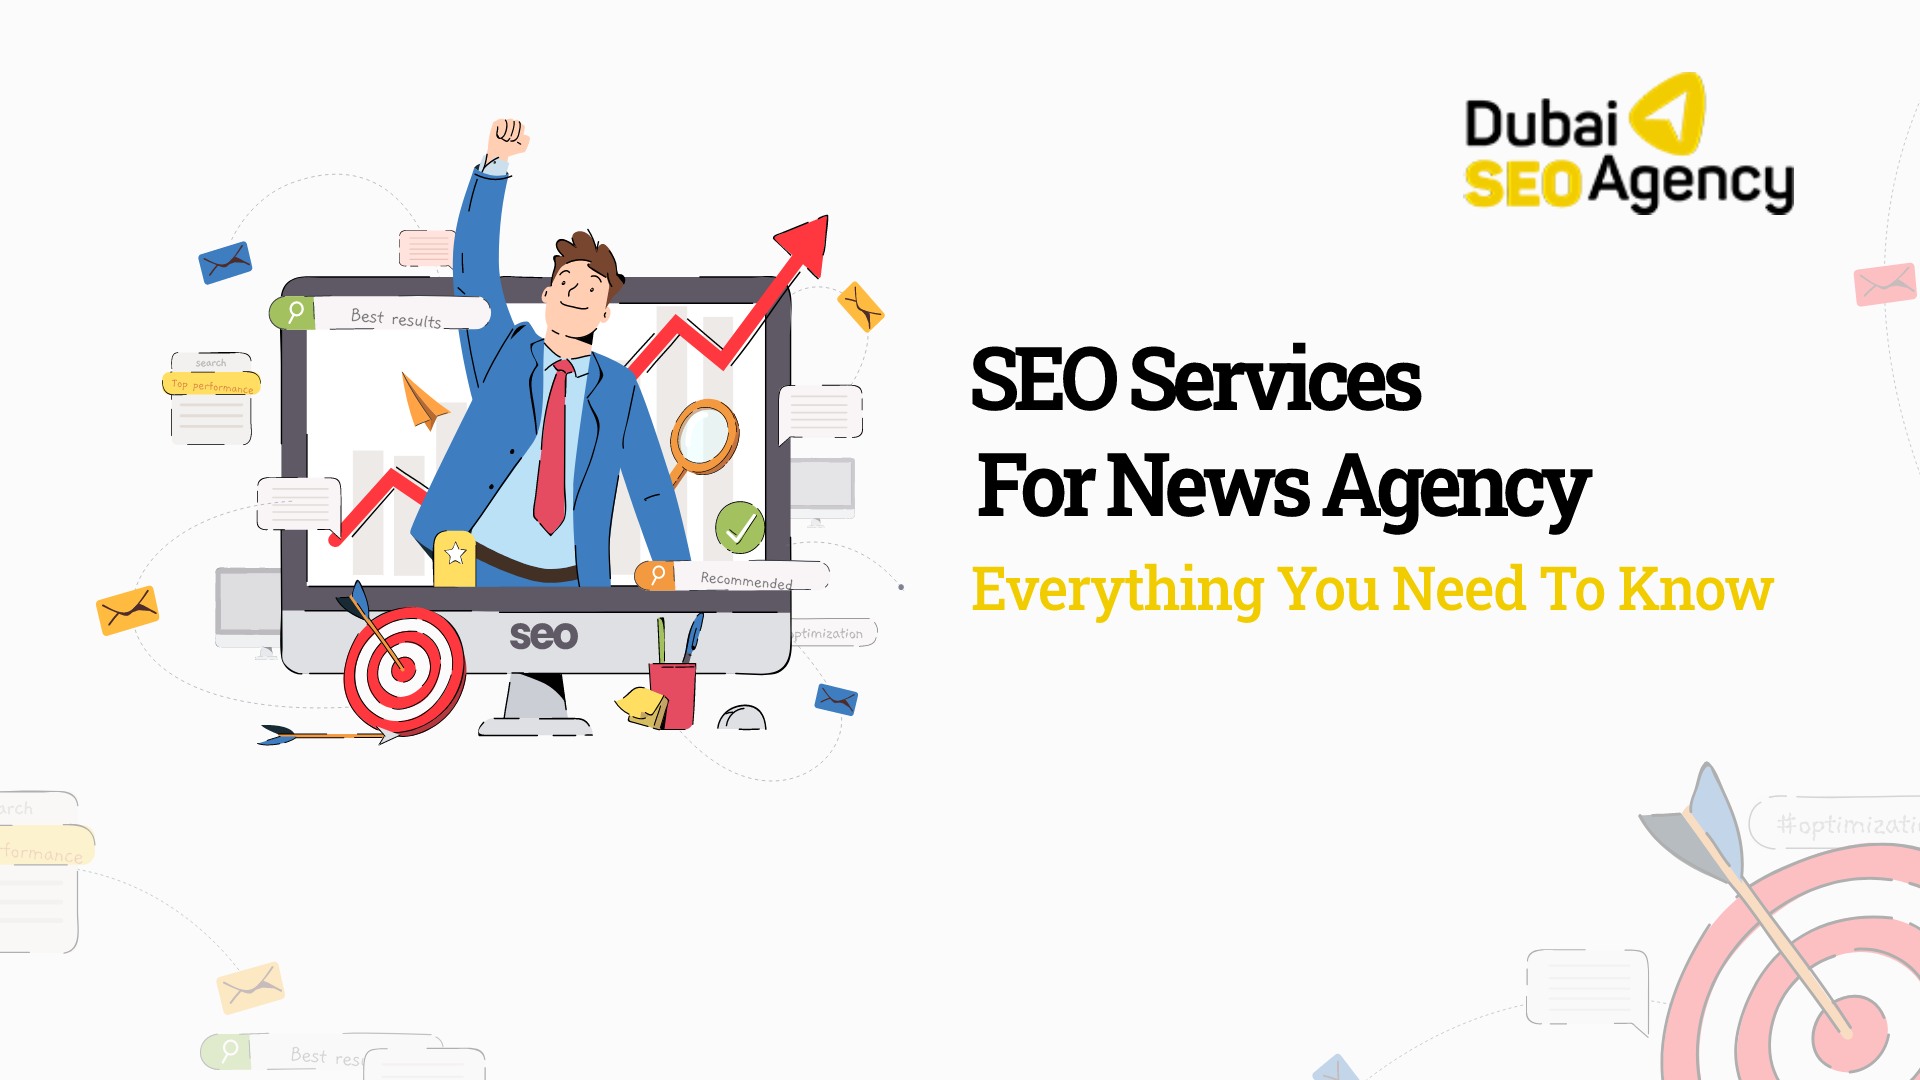 SEO Services For News Agency: Everything You Need To Know